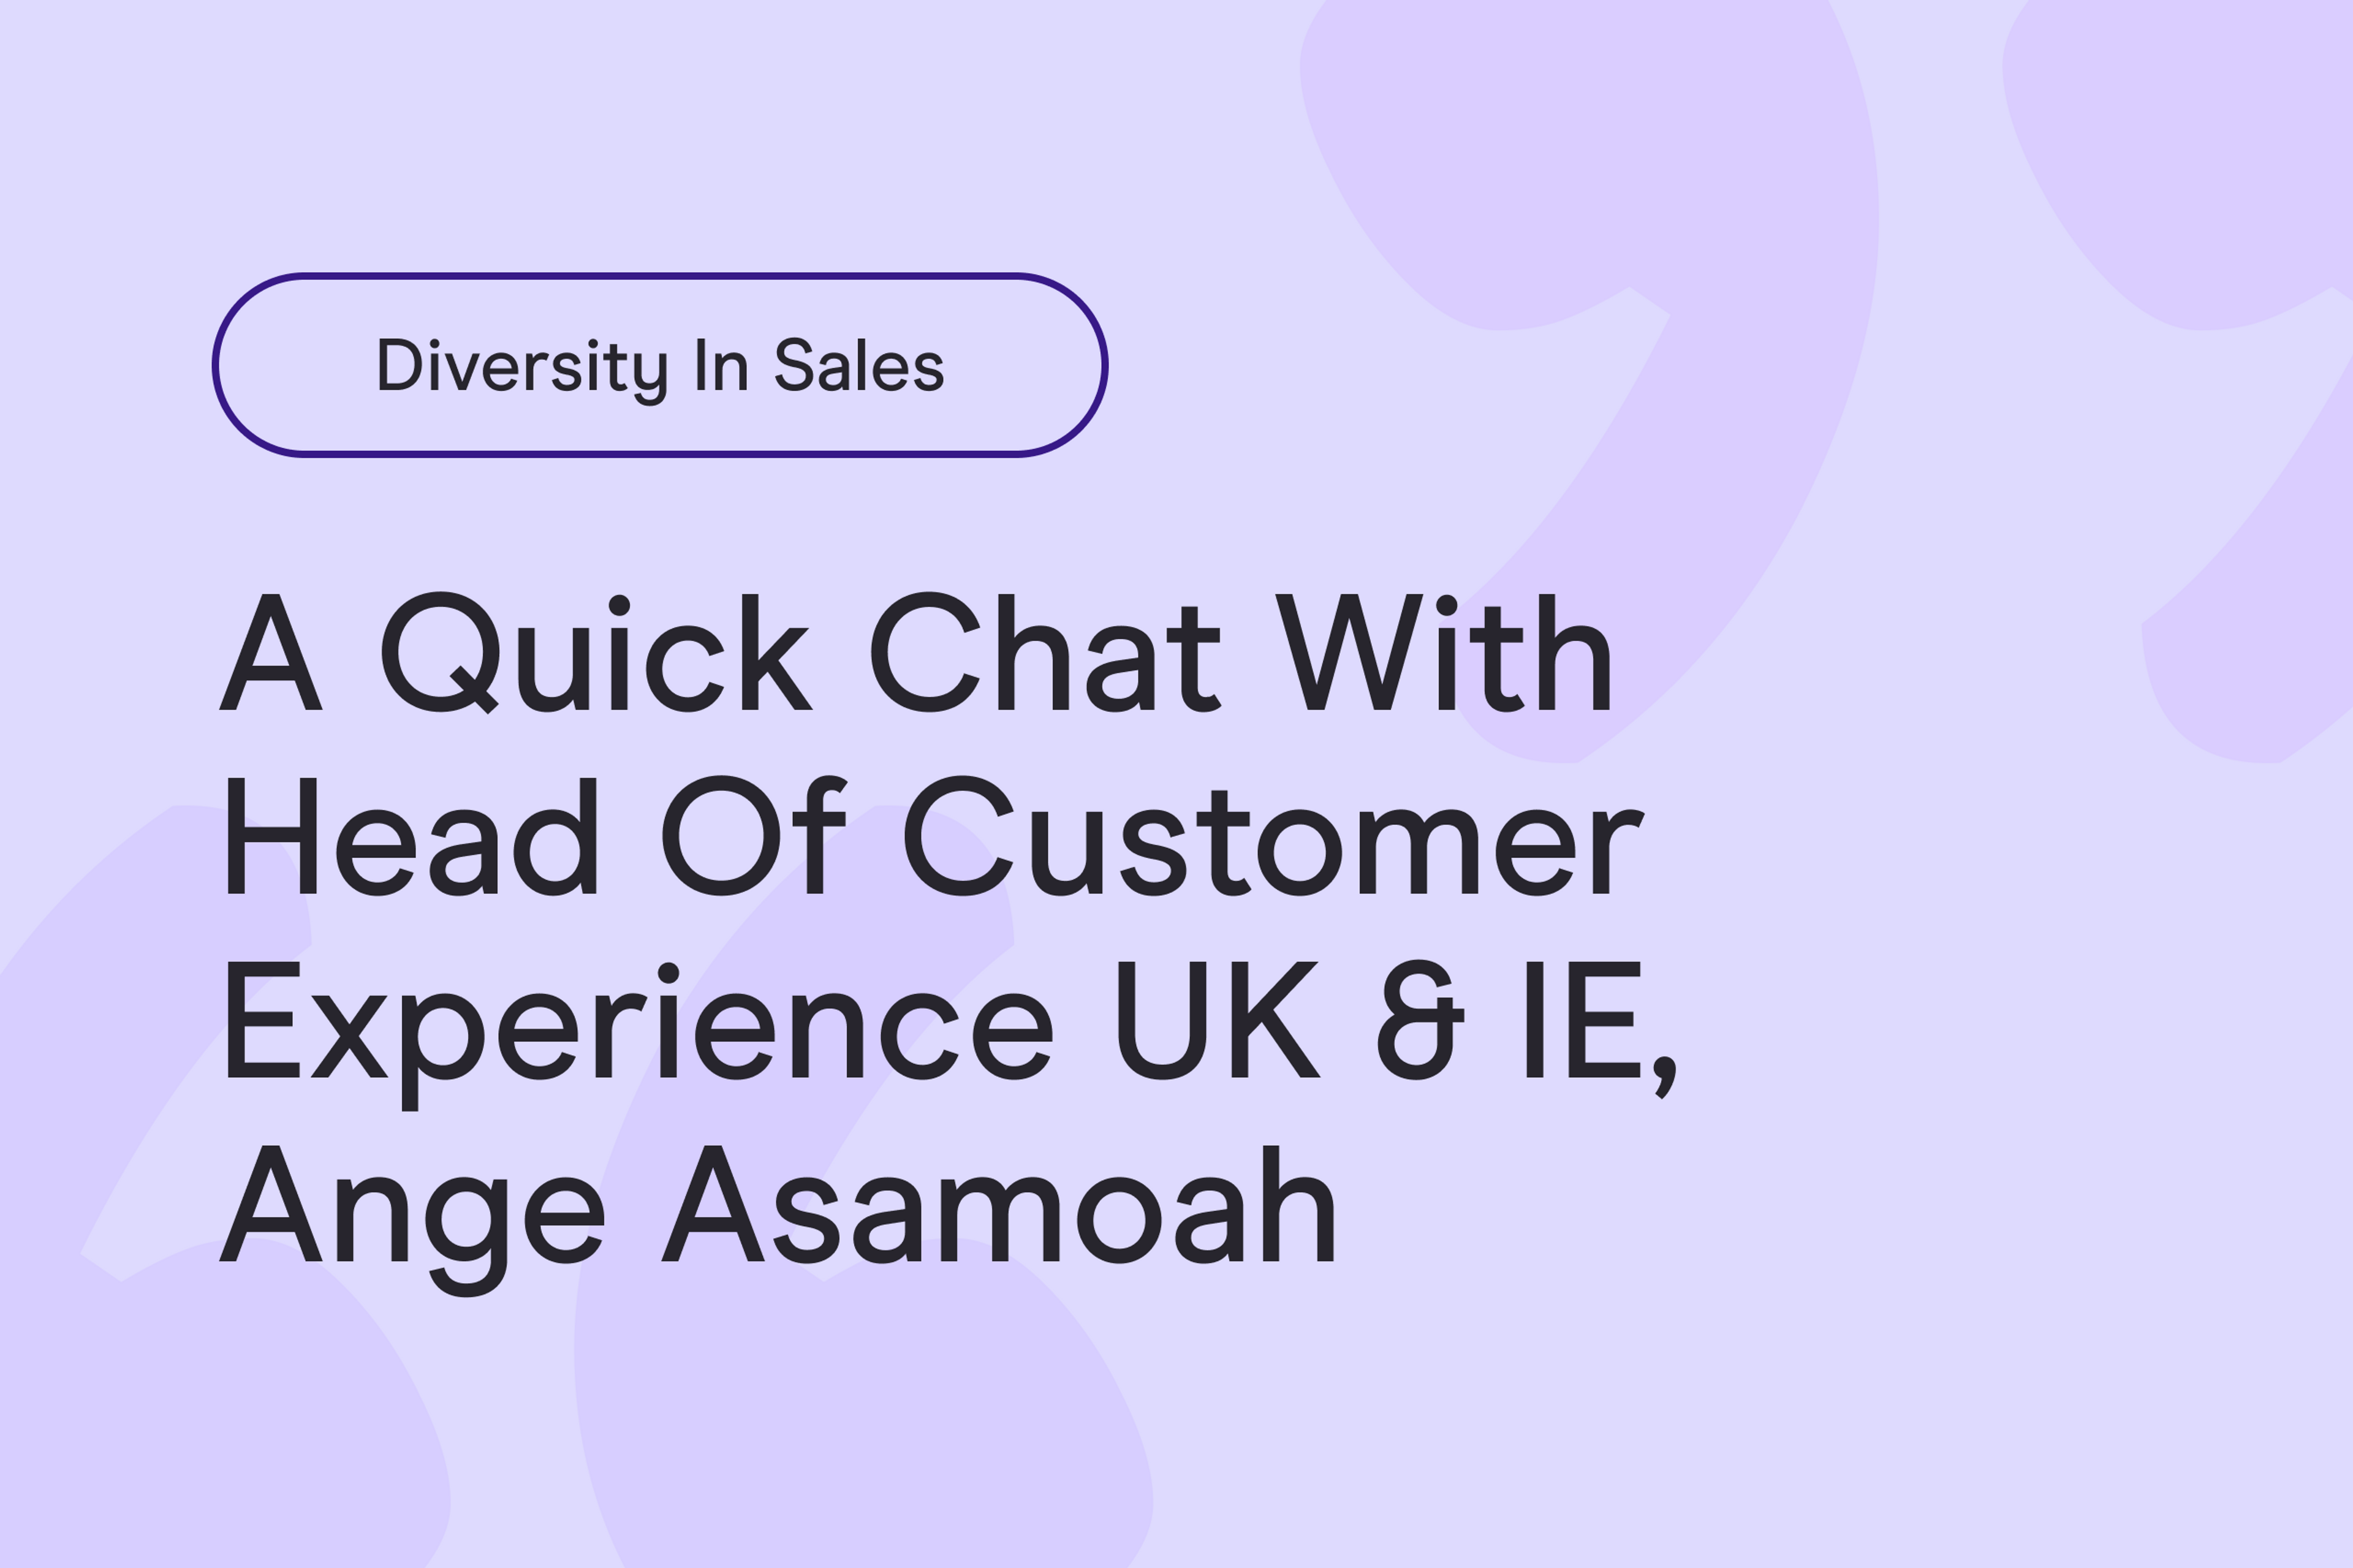 Diversity in Sales: a foreword by Head of Customer Experience UK & IE, Ange Asamoah